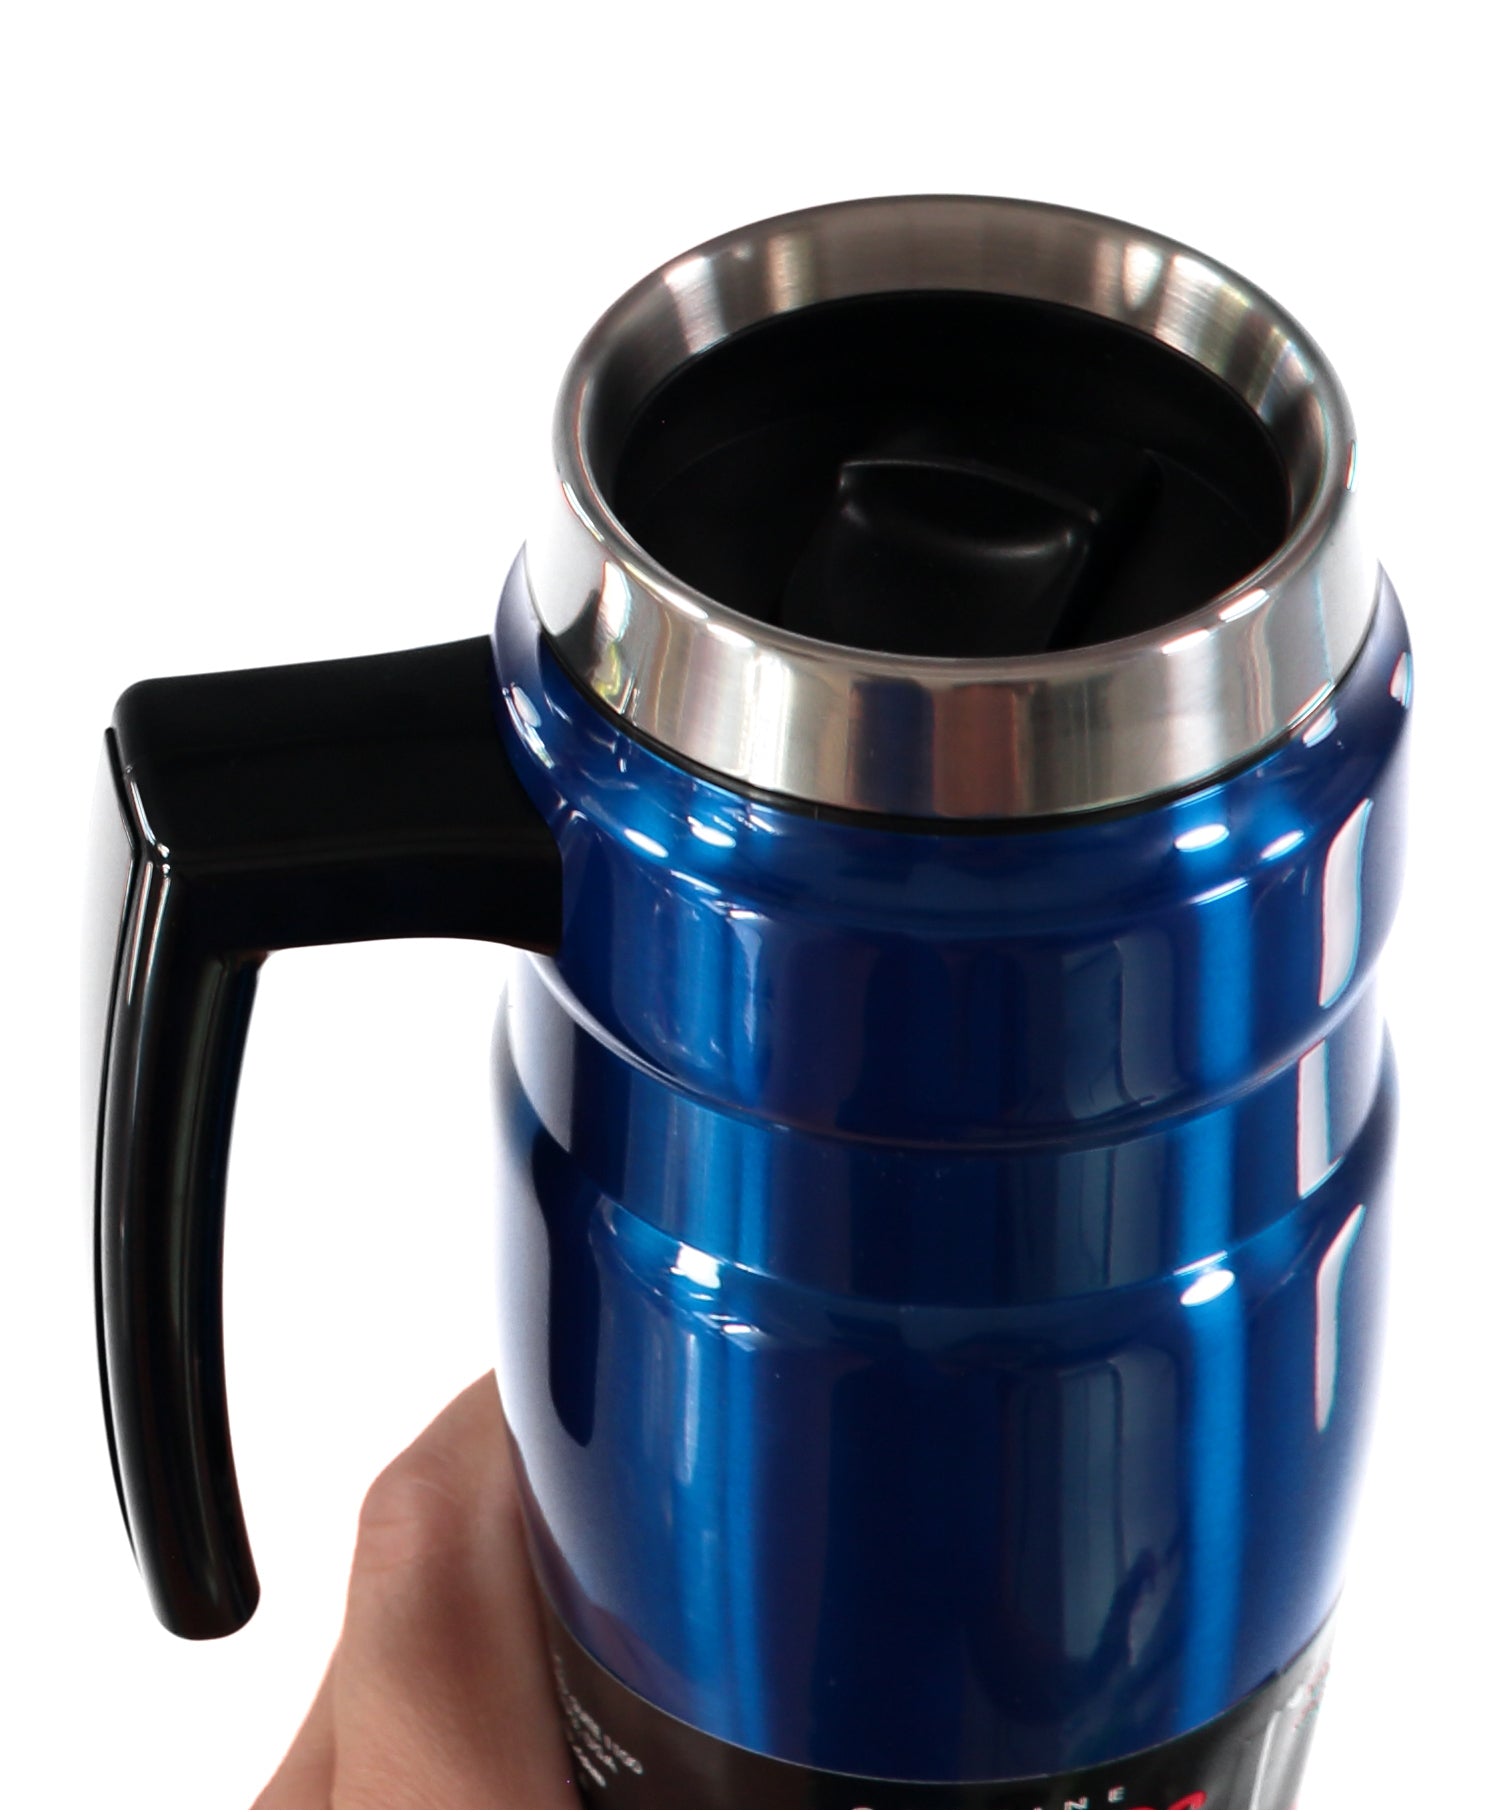 Thermos Stainless King Insulated Stainless Steel Travel Mug with Handle, 16 Oz.